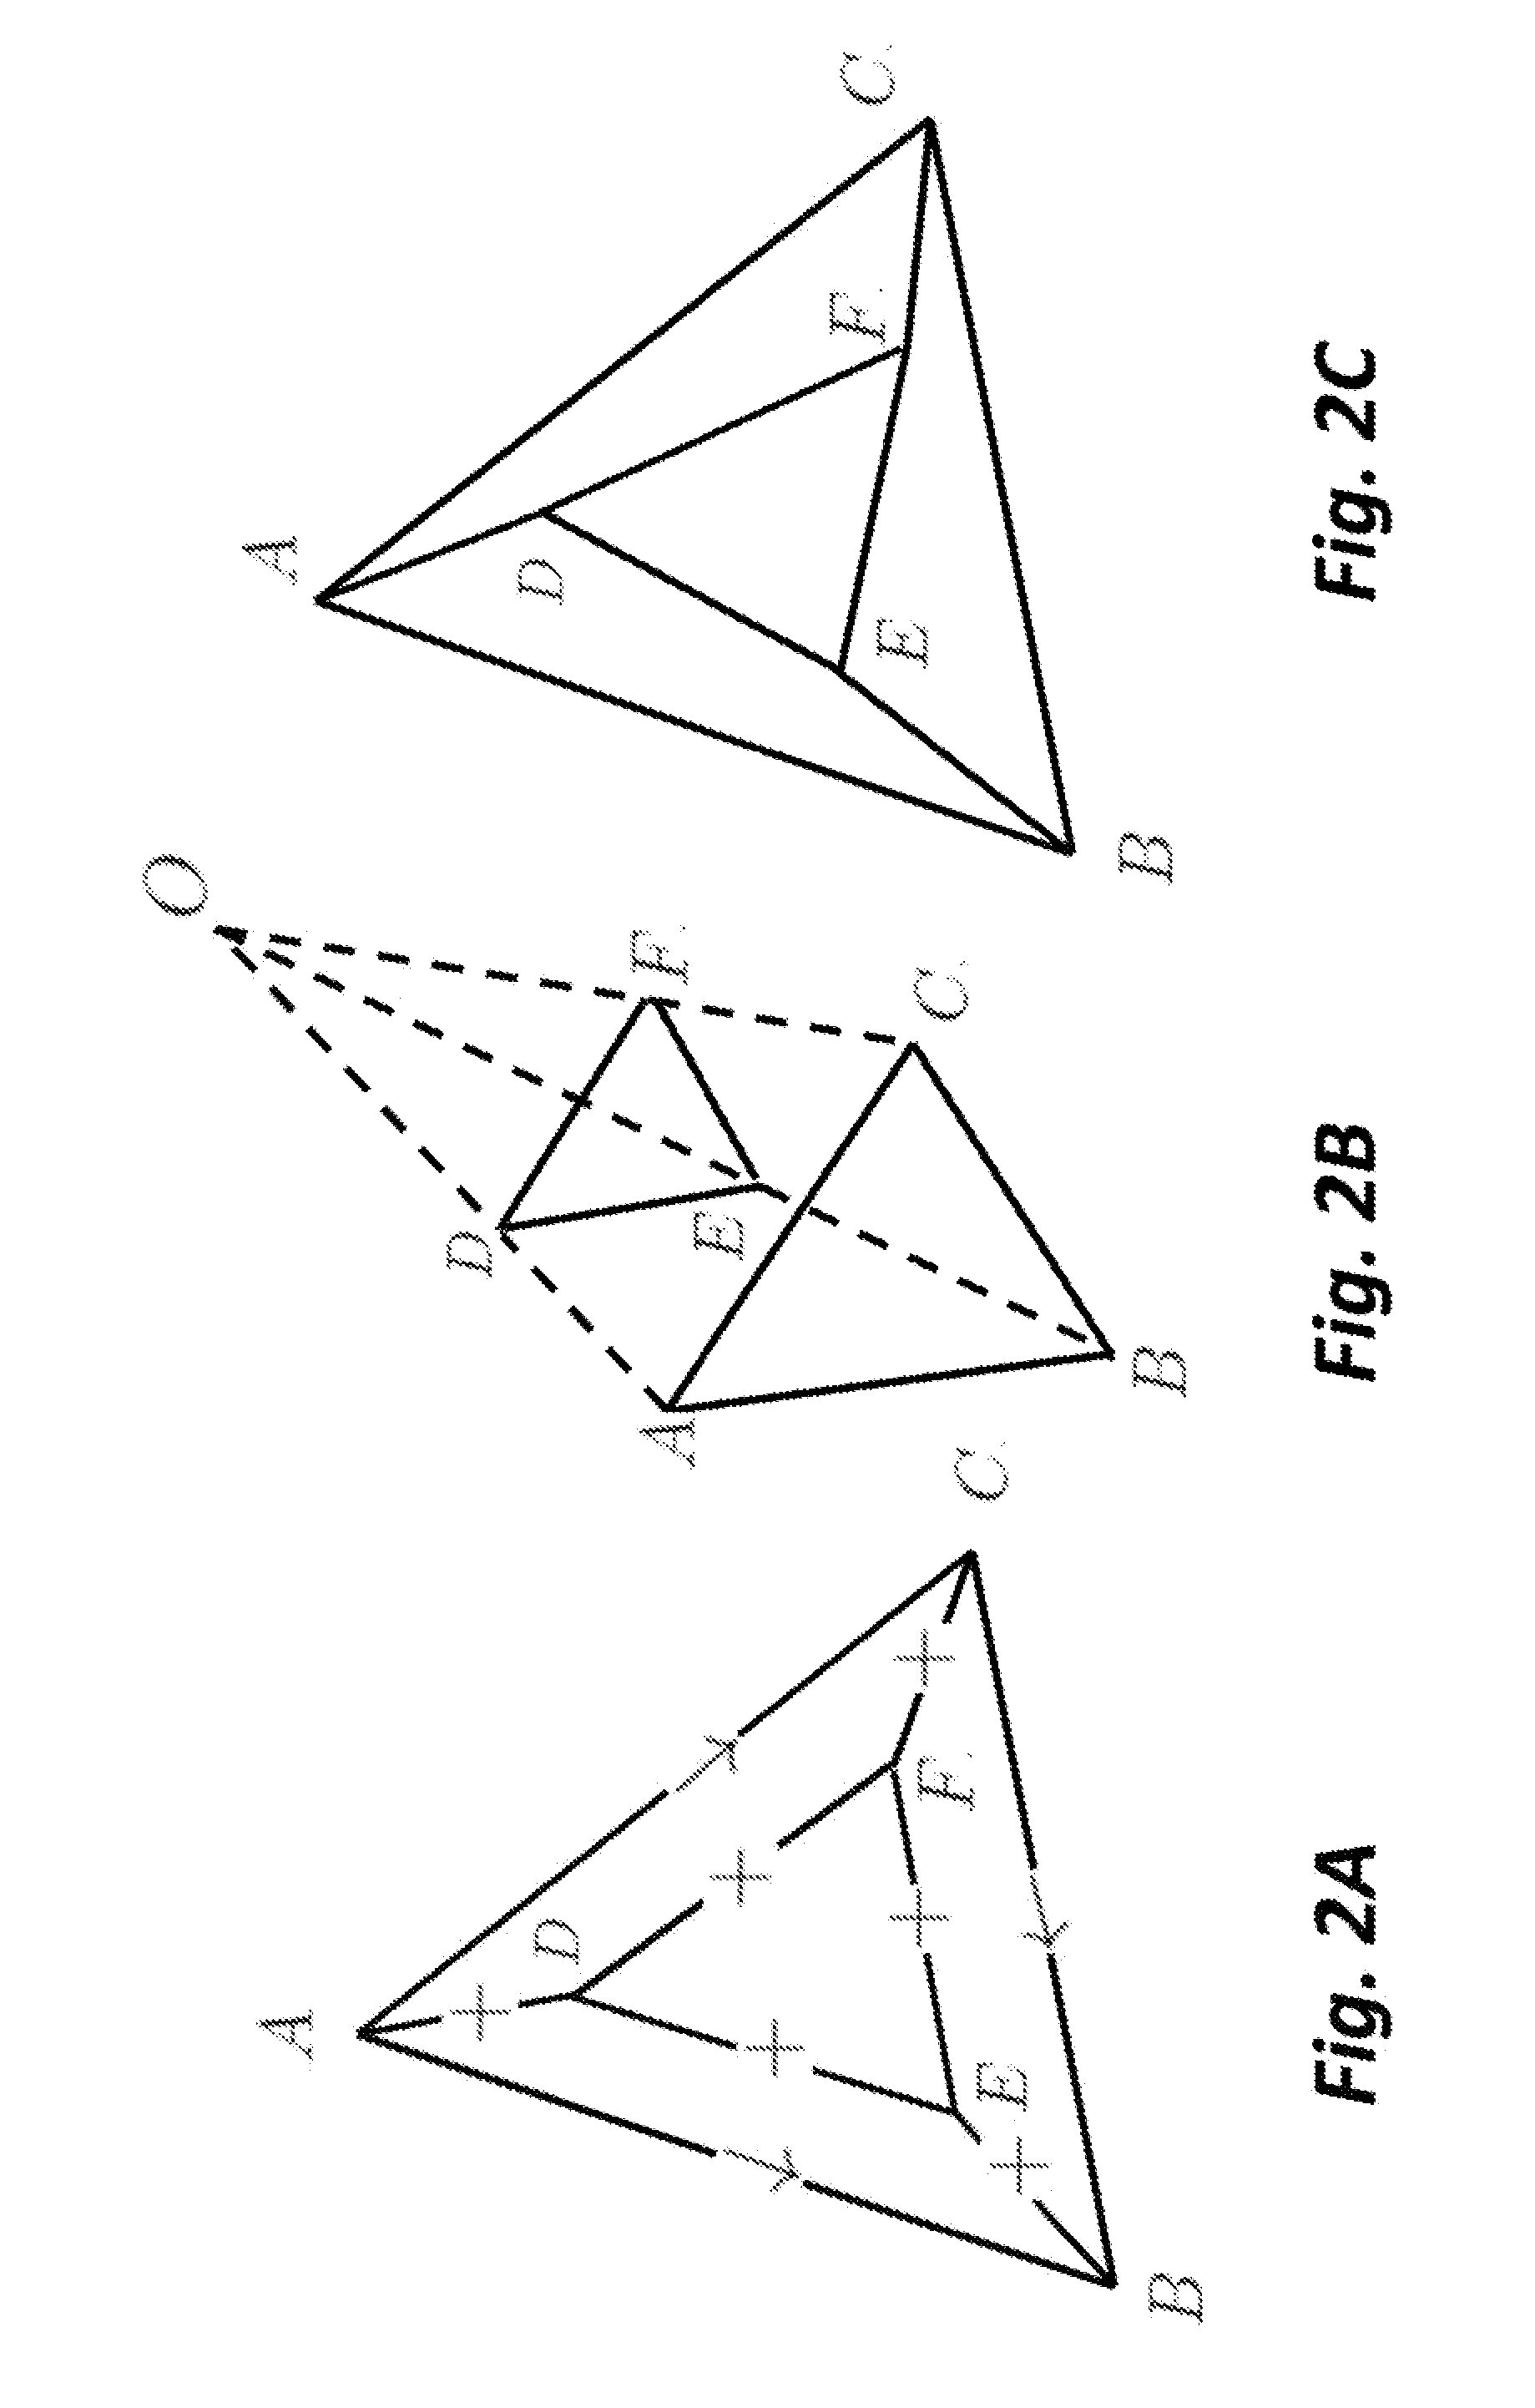 Method for Reconstructing 3D Lines from 2D Lines in an Image